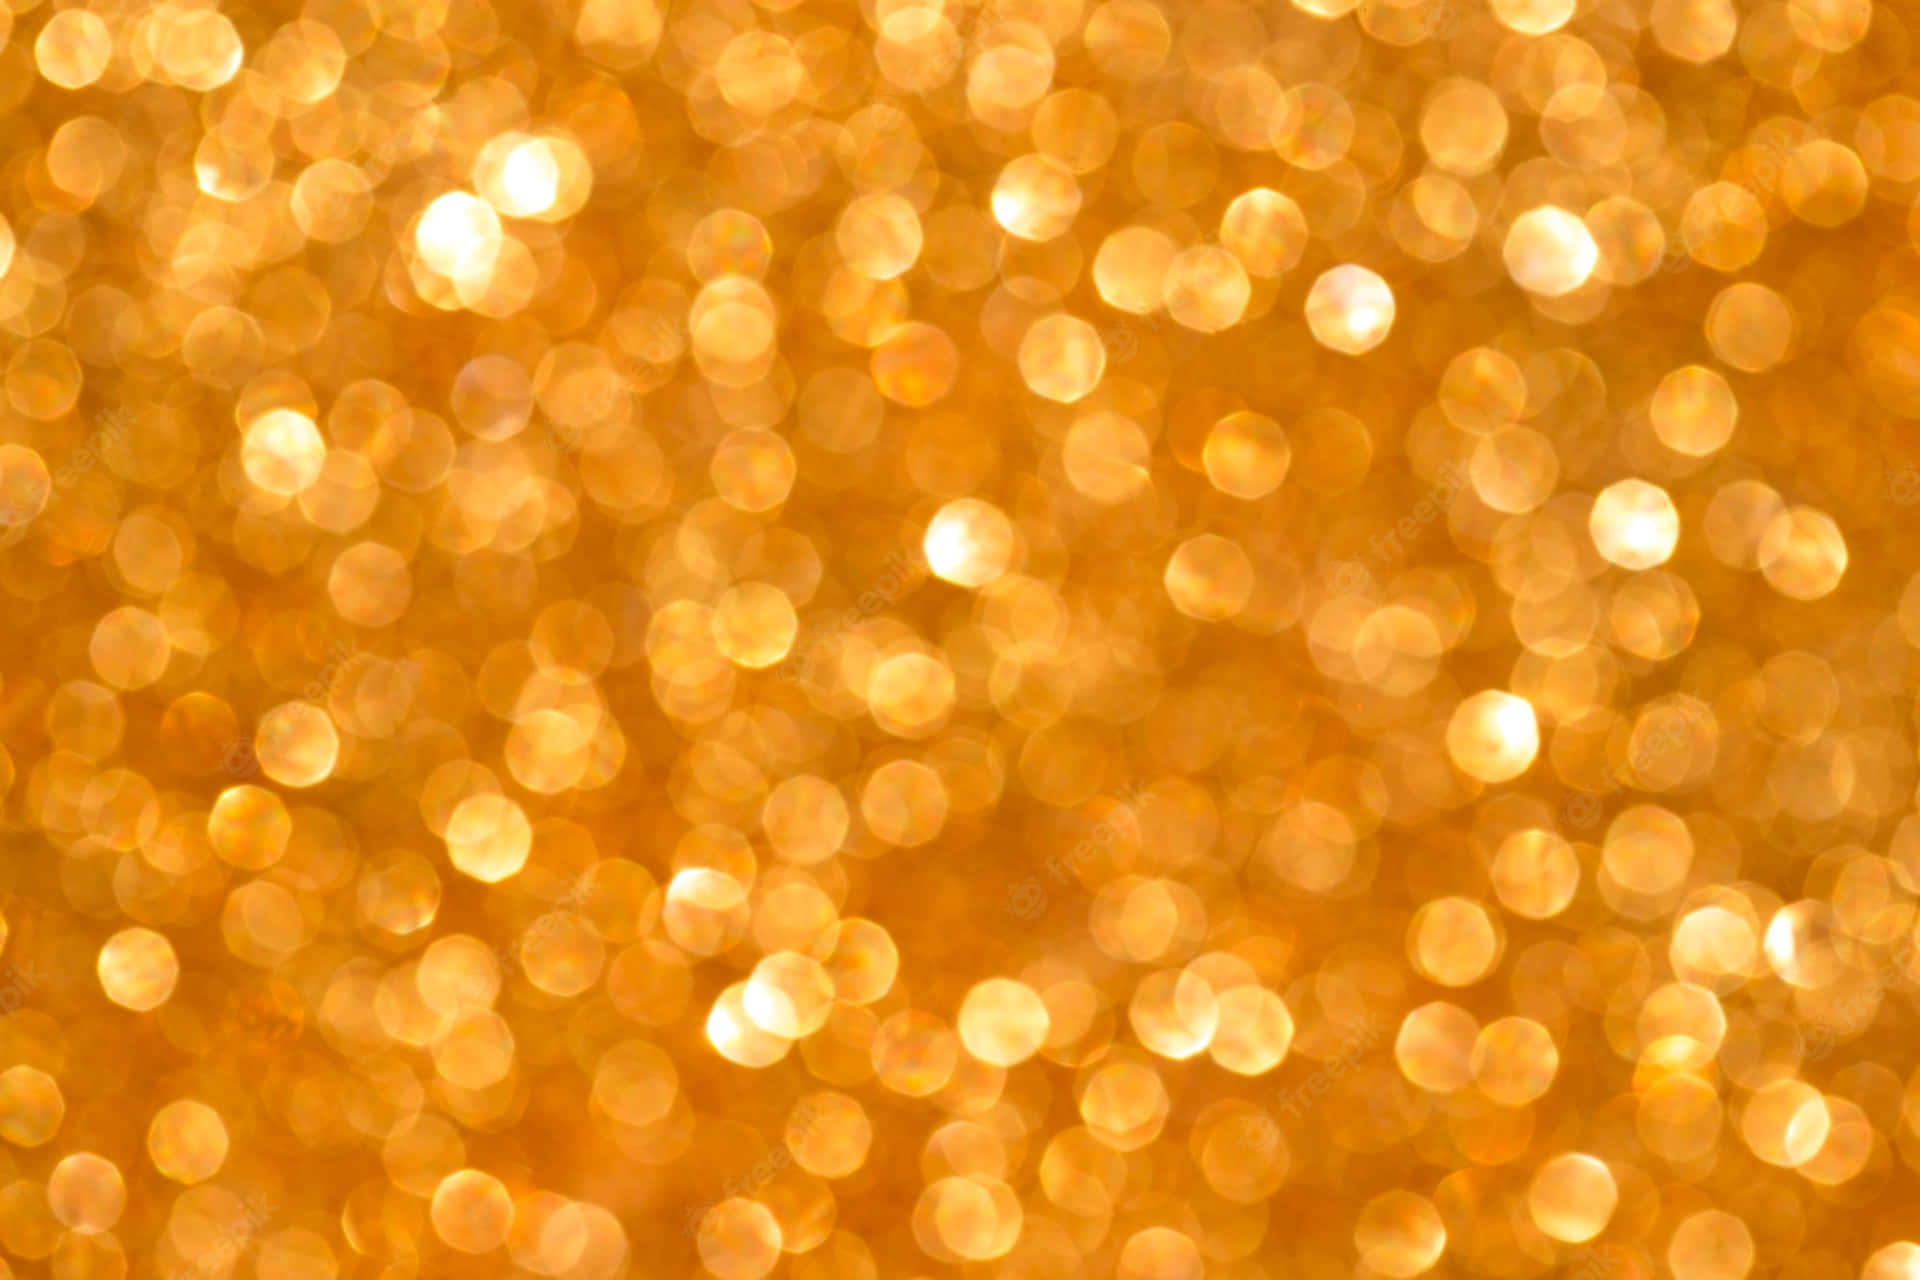 Enjoy the sparkle and shine of yellow glitter Wallpaper